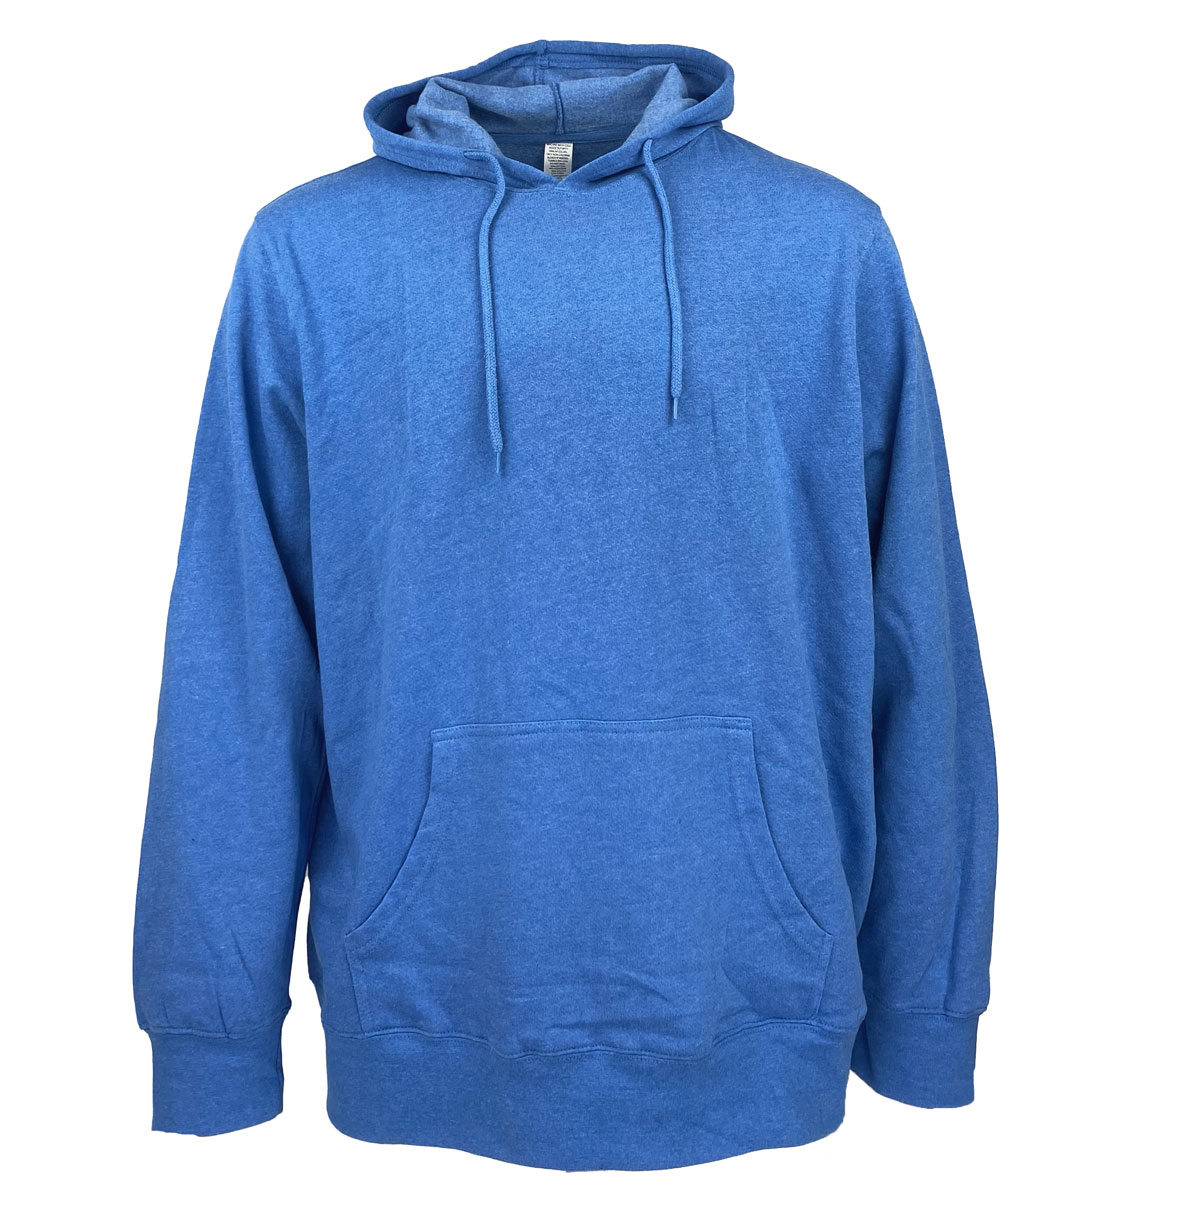 Mens Pullover Hoodies-RG Riley Wholesale Off Price Clothing & Closeout ...